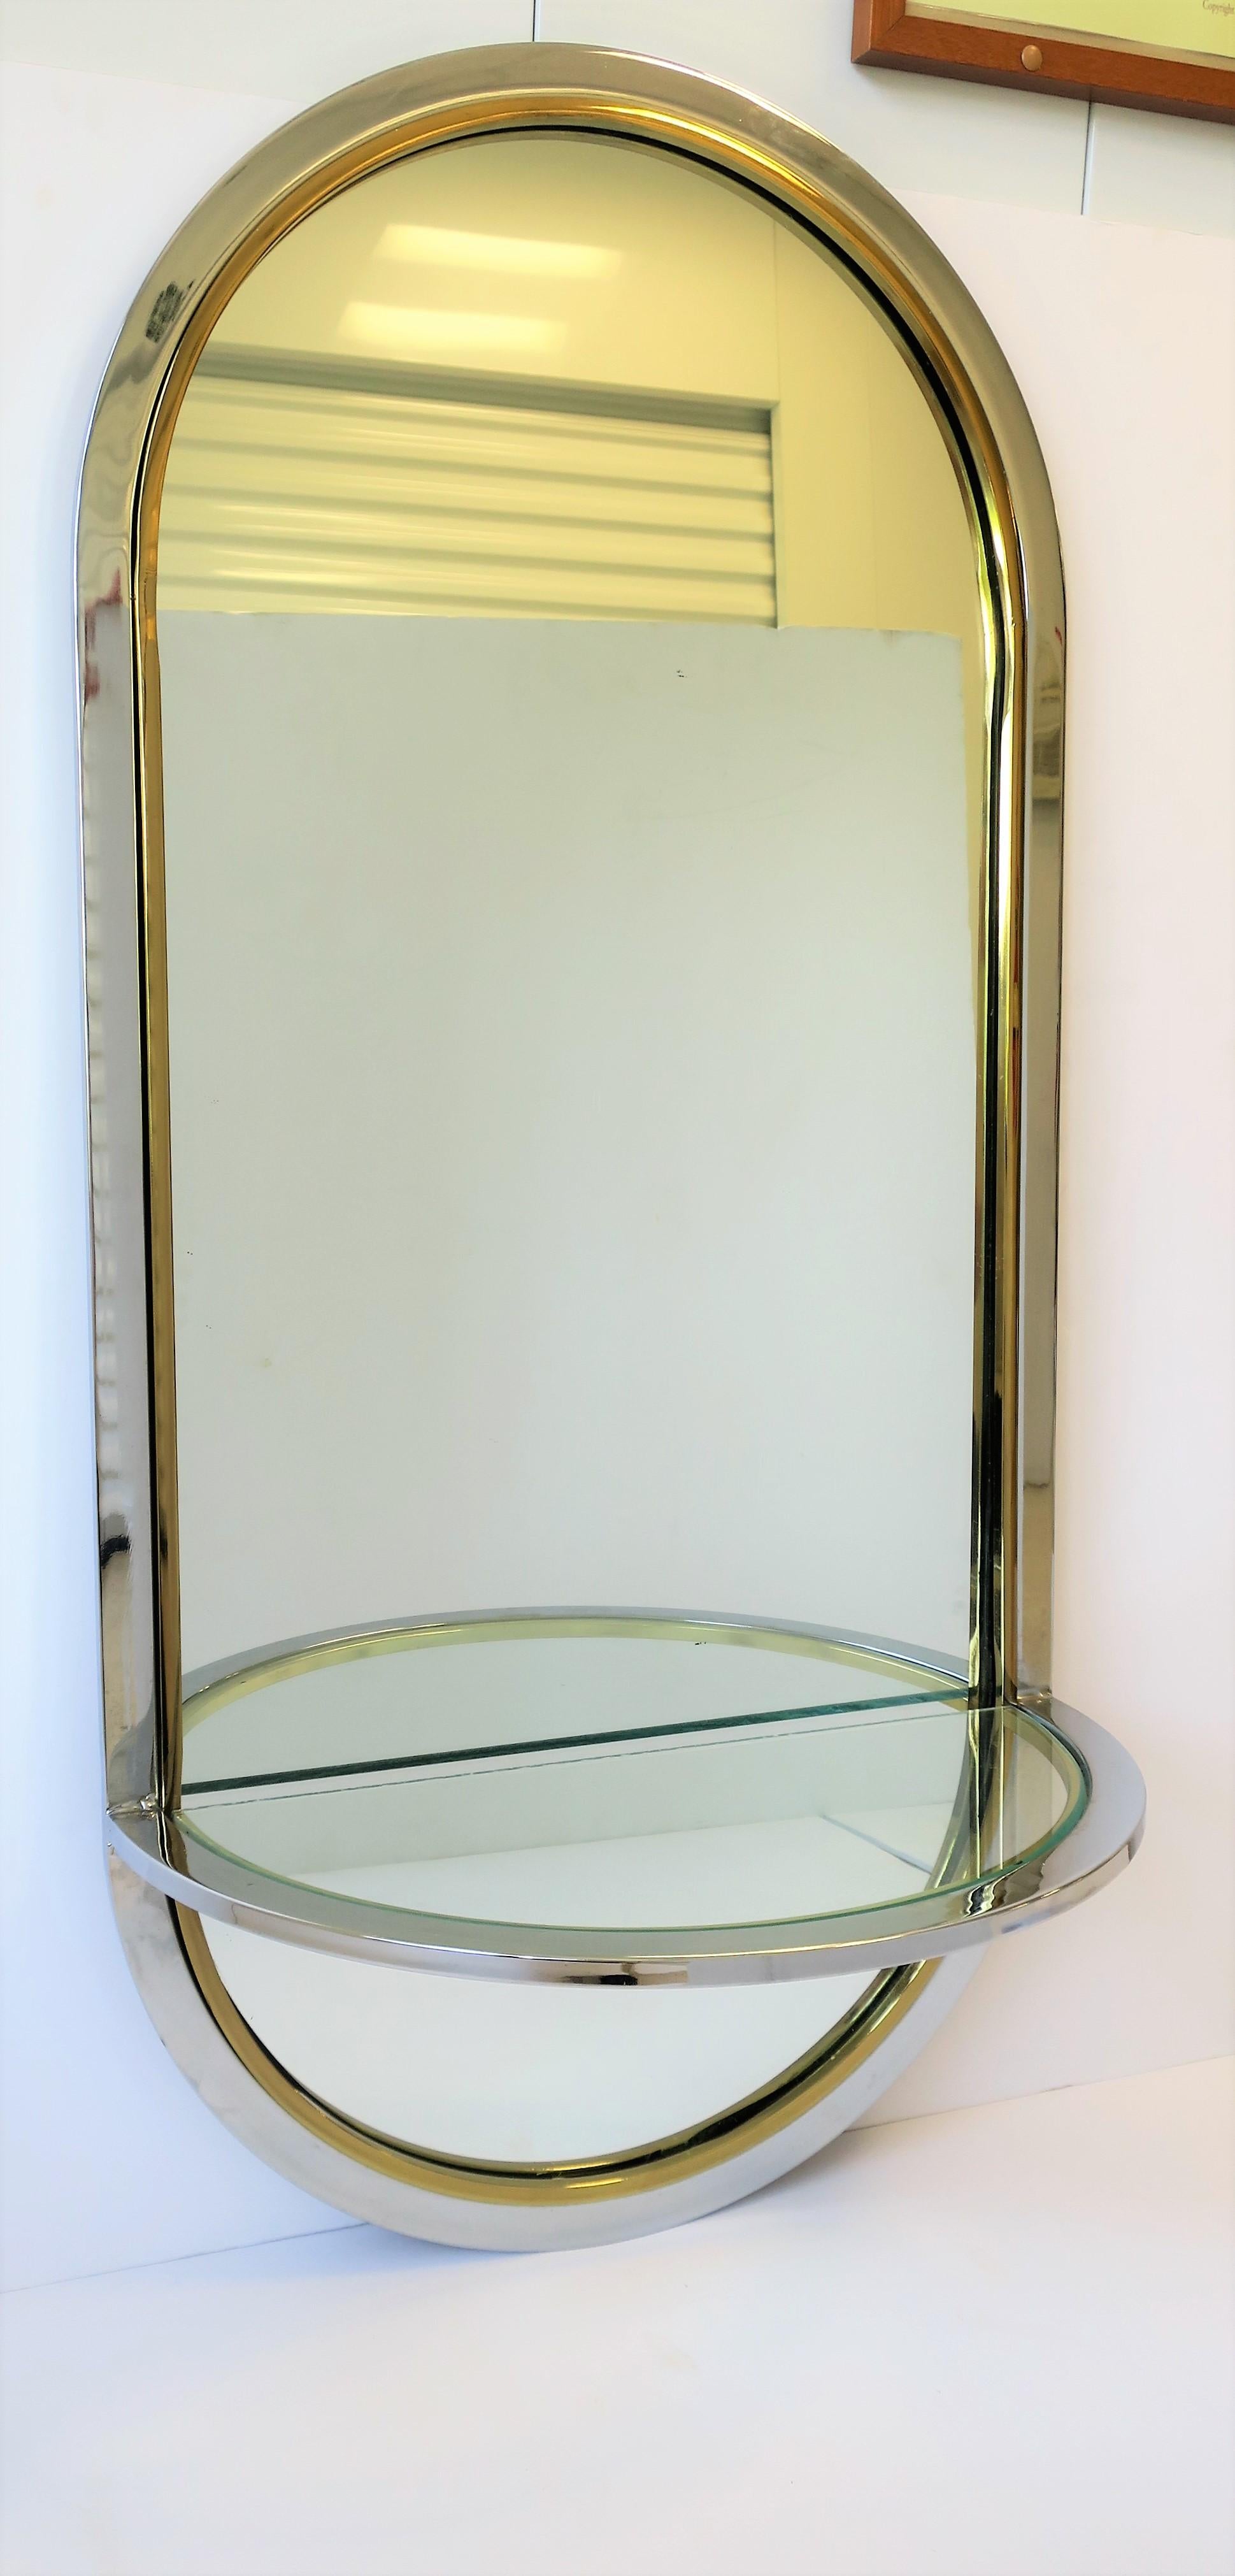 A beautiful Postmodern or '70s Modern brass and chrome wall mirror, circa late-20th century. This wall mirror has a semi-circular top and bottom, and a demilune (half-moon) console shelf - demilune glass shelf is held by its chrome and brass frame